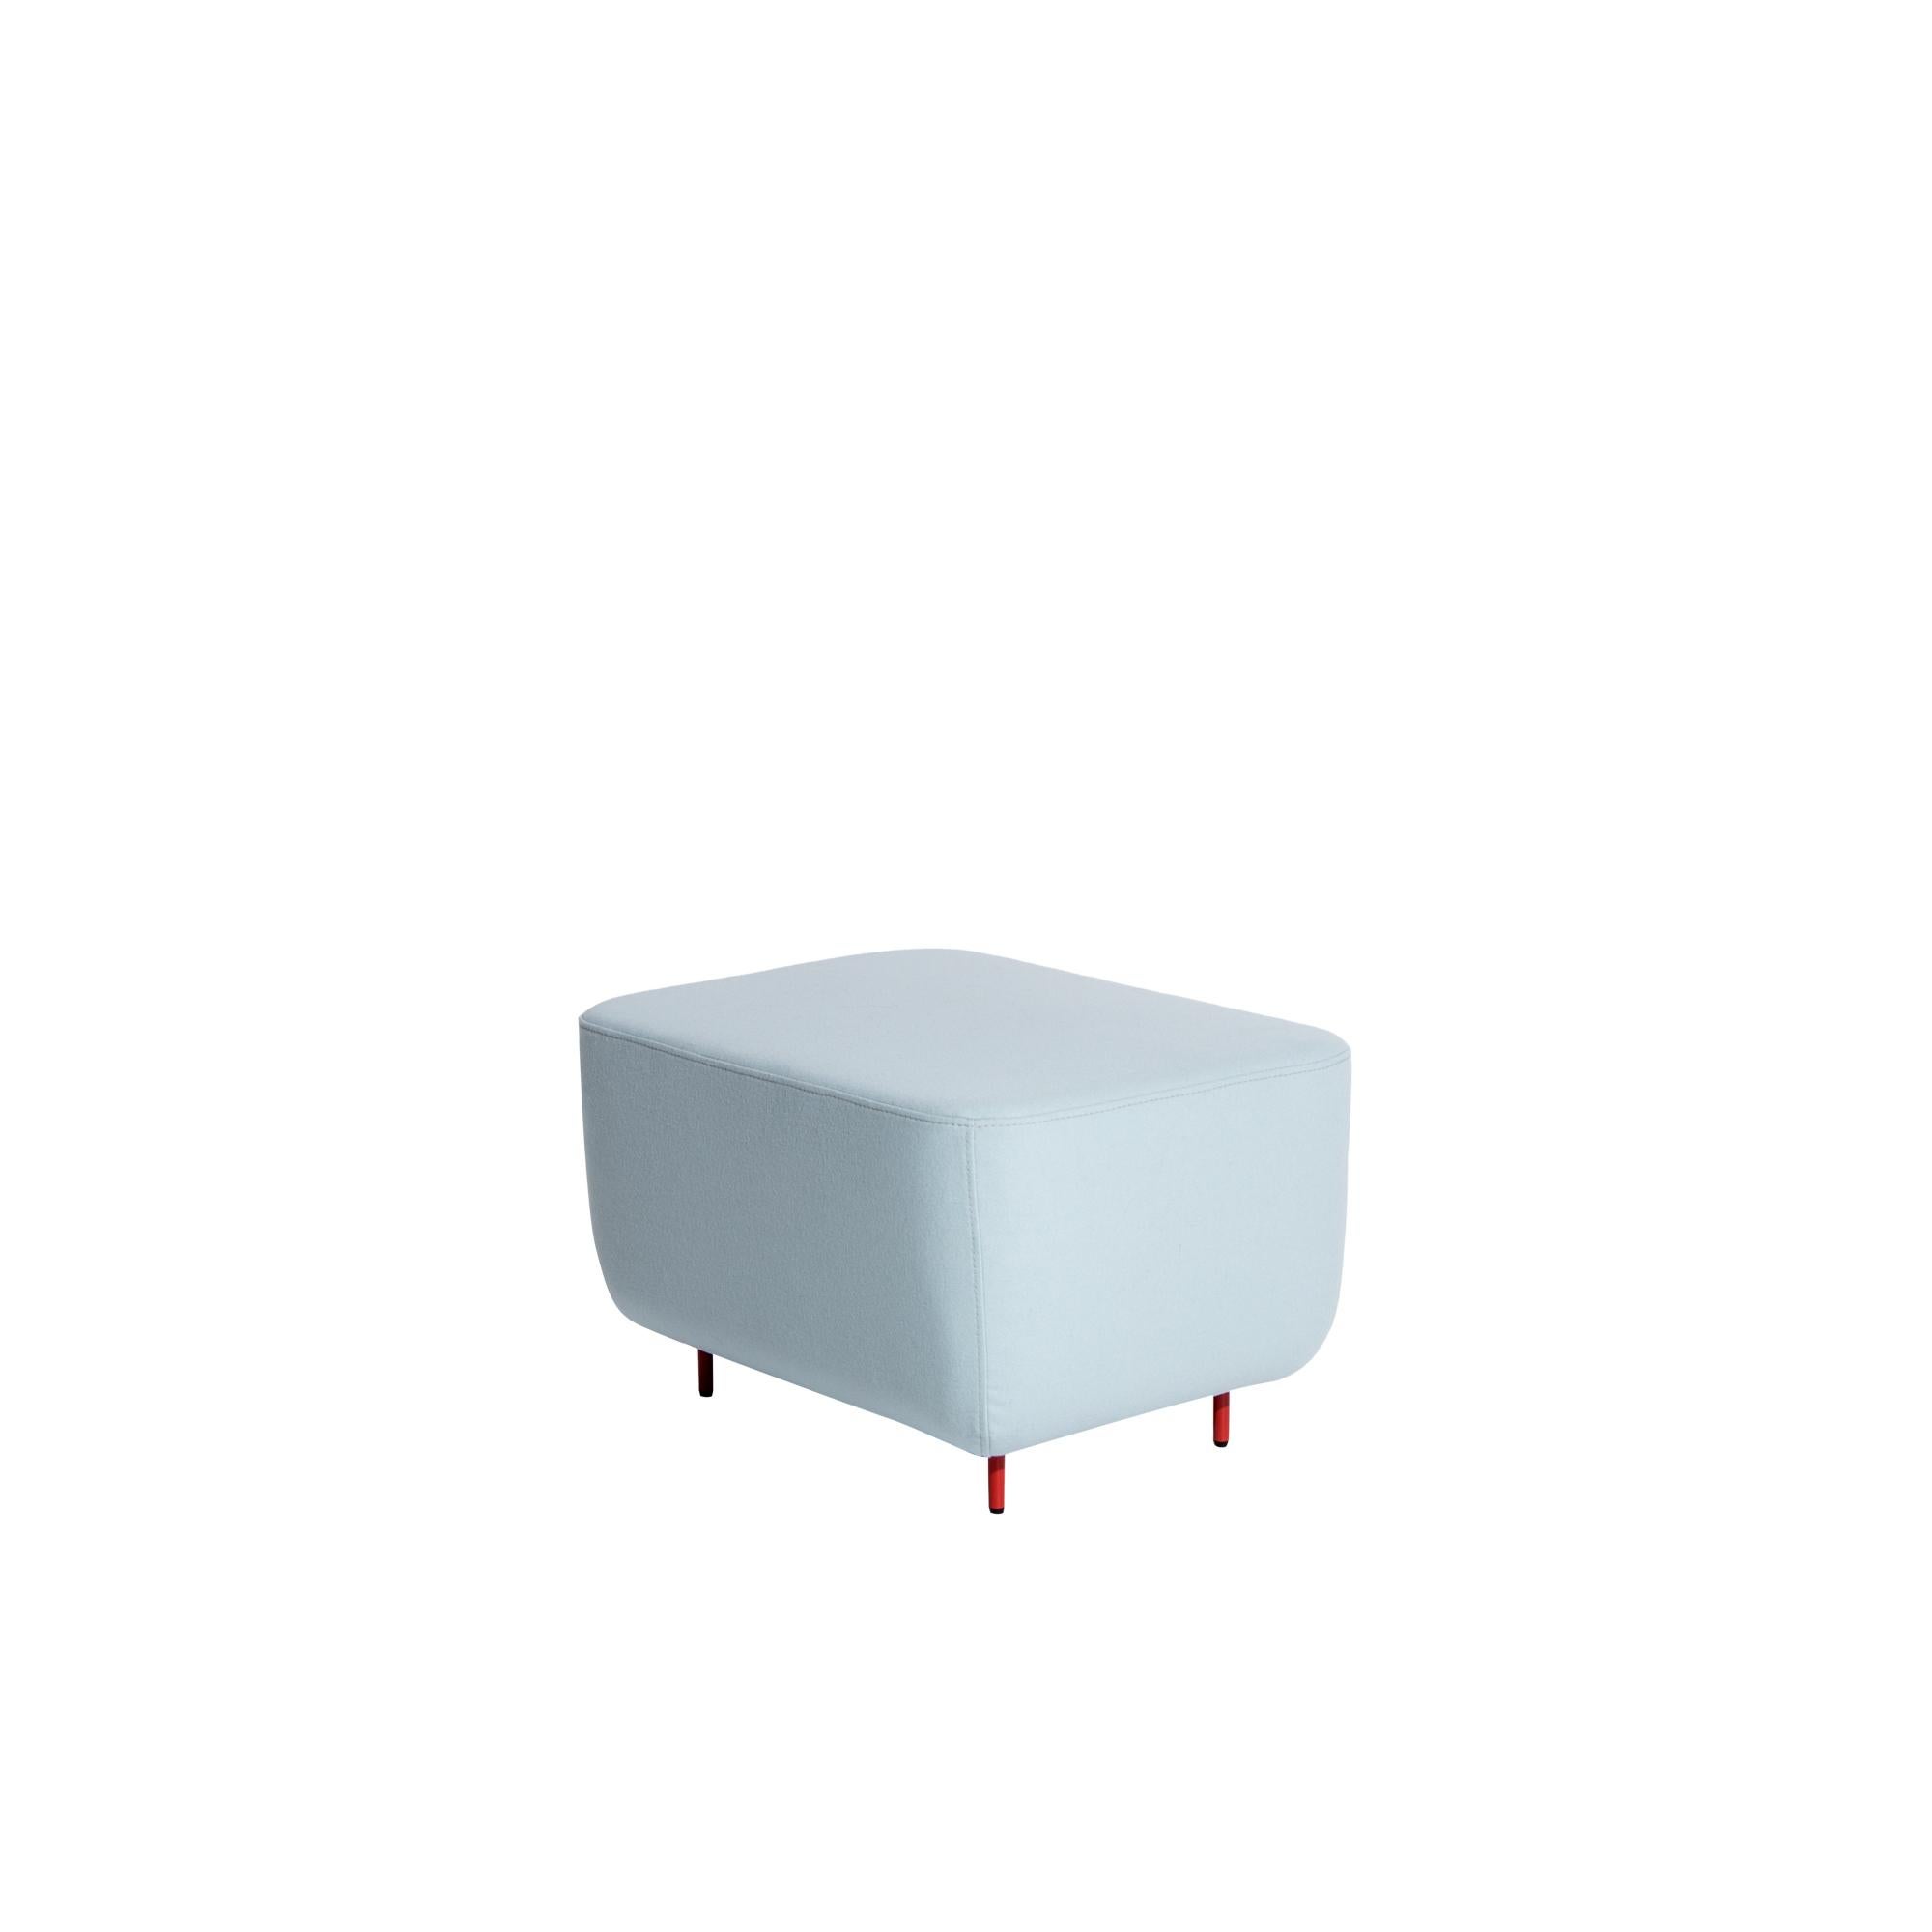 Petite Friture Small Hoff Stool in Blue by Morten & Jonas, 2015

Hoff created by designer duo Morten & Jonas is a collection of two modular stools and two modular armchairs. they can combine to make a sofa as well an entire living room area. They